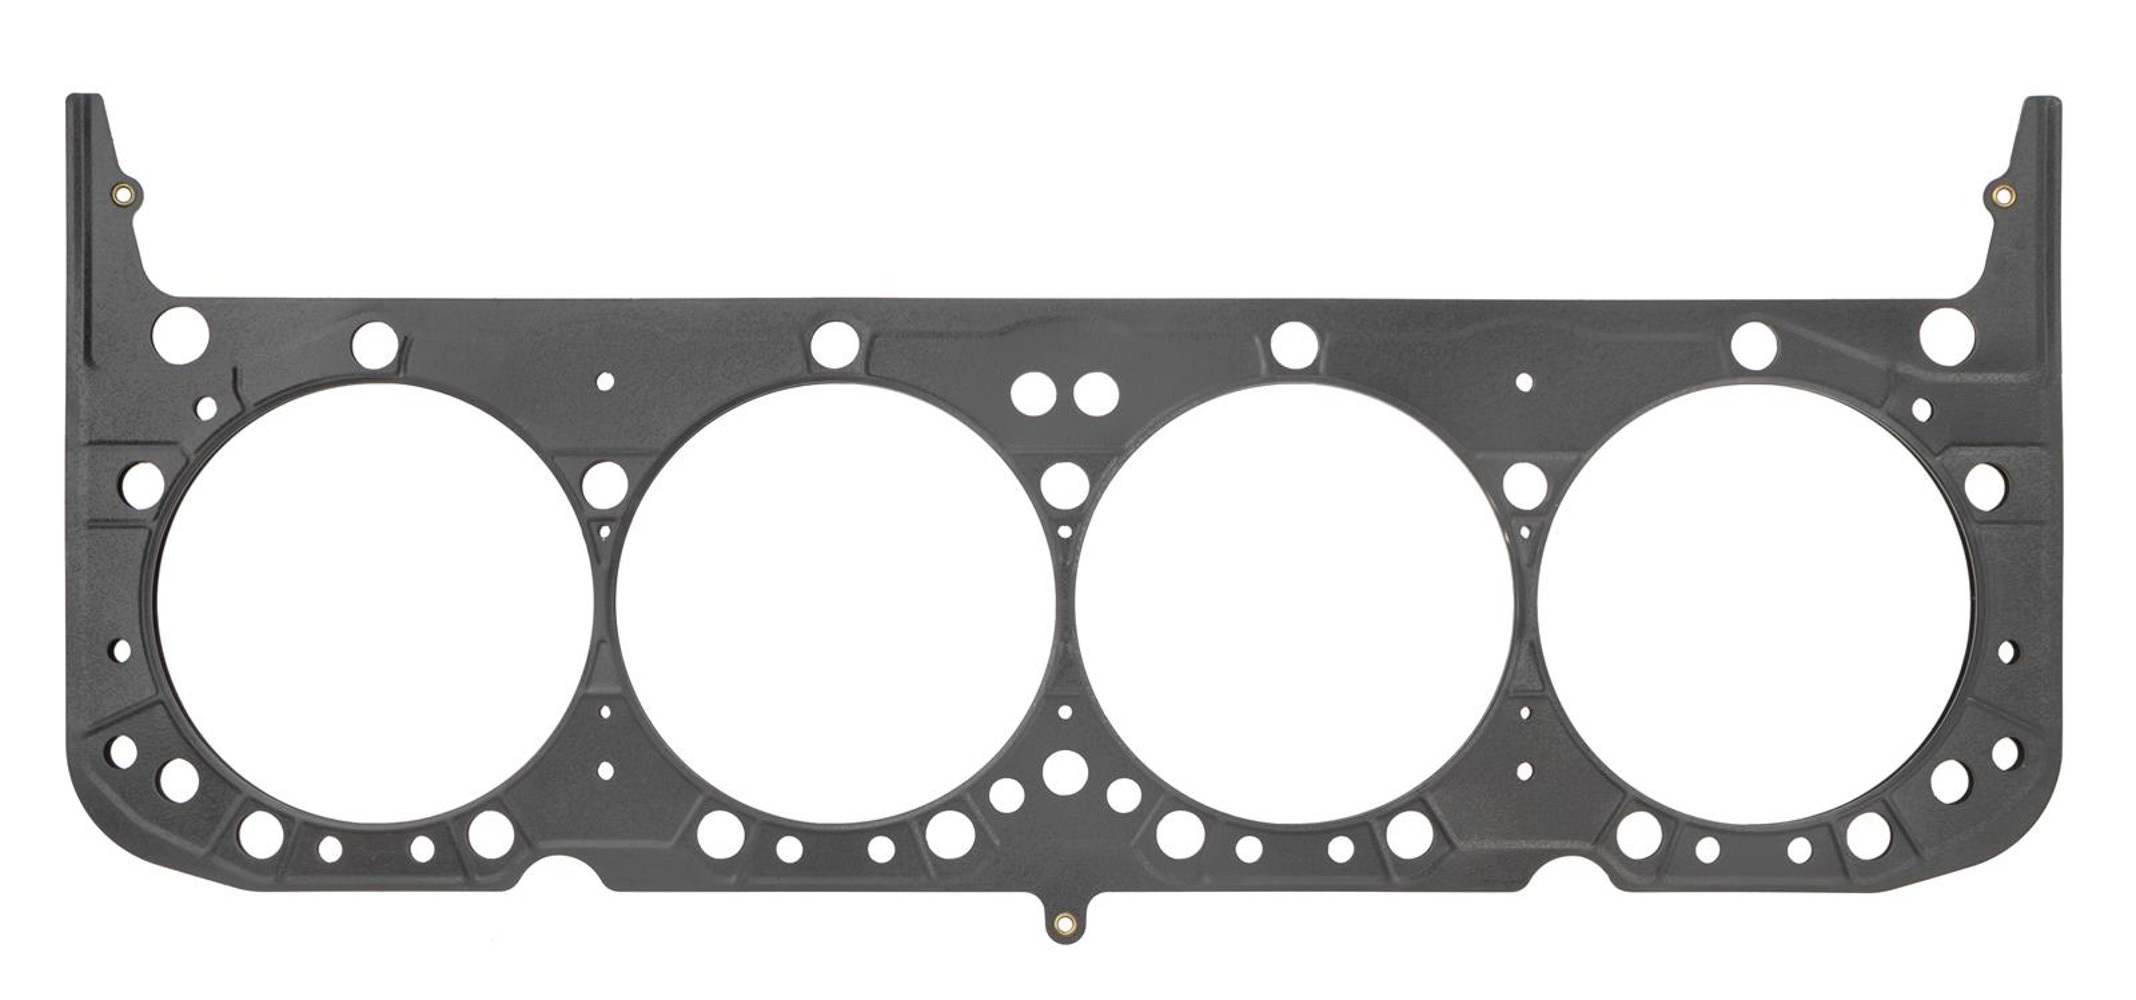 SCE Gaskets M110628 - Cylinder Head Gasket, MLS Spartan, 4.067 in Bore, 0.027 in Compression Thickness, Multi-Layer Steel, Small Block Chevy, Each